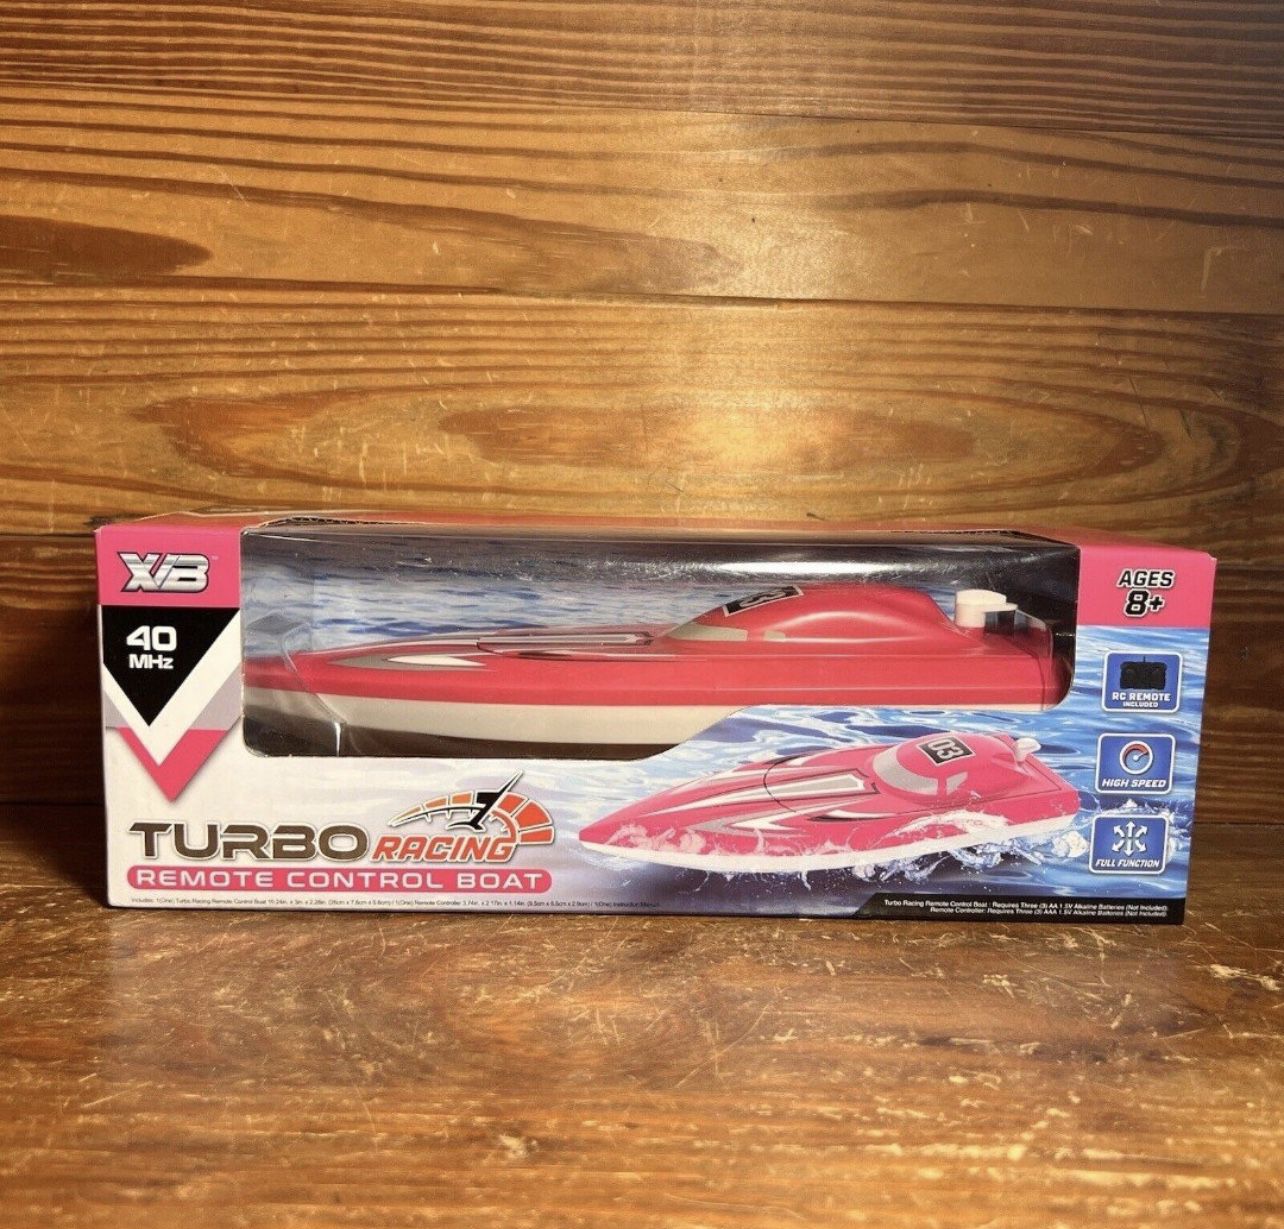 New XVB Turbo Racing 40mhz Remote Control Blue & Yellow Speed Boat